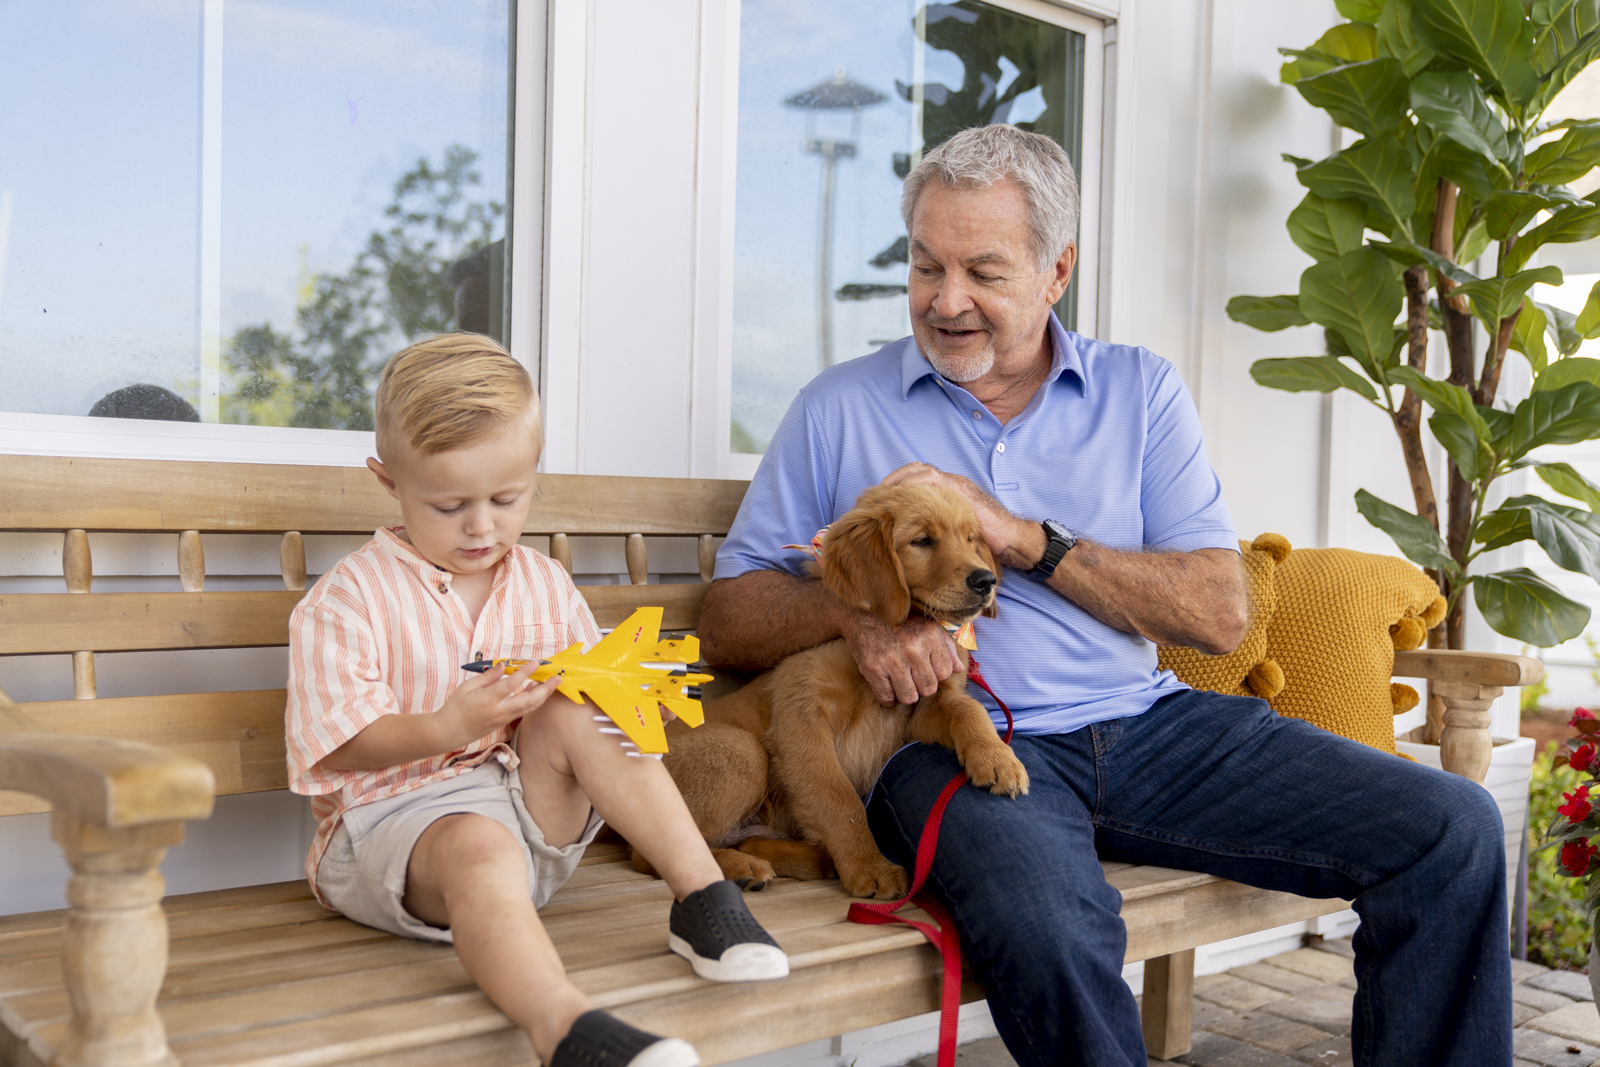 An older man and a young boy sitting on a bench with a puppy.